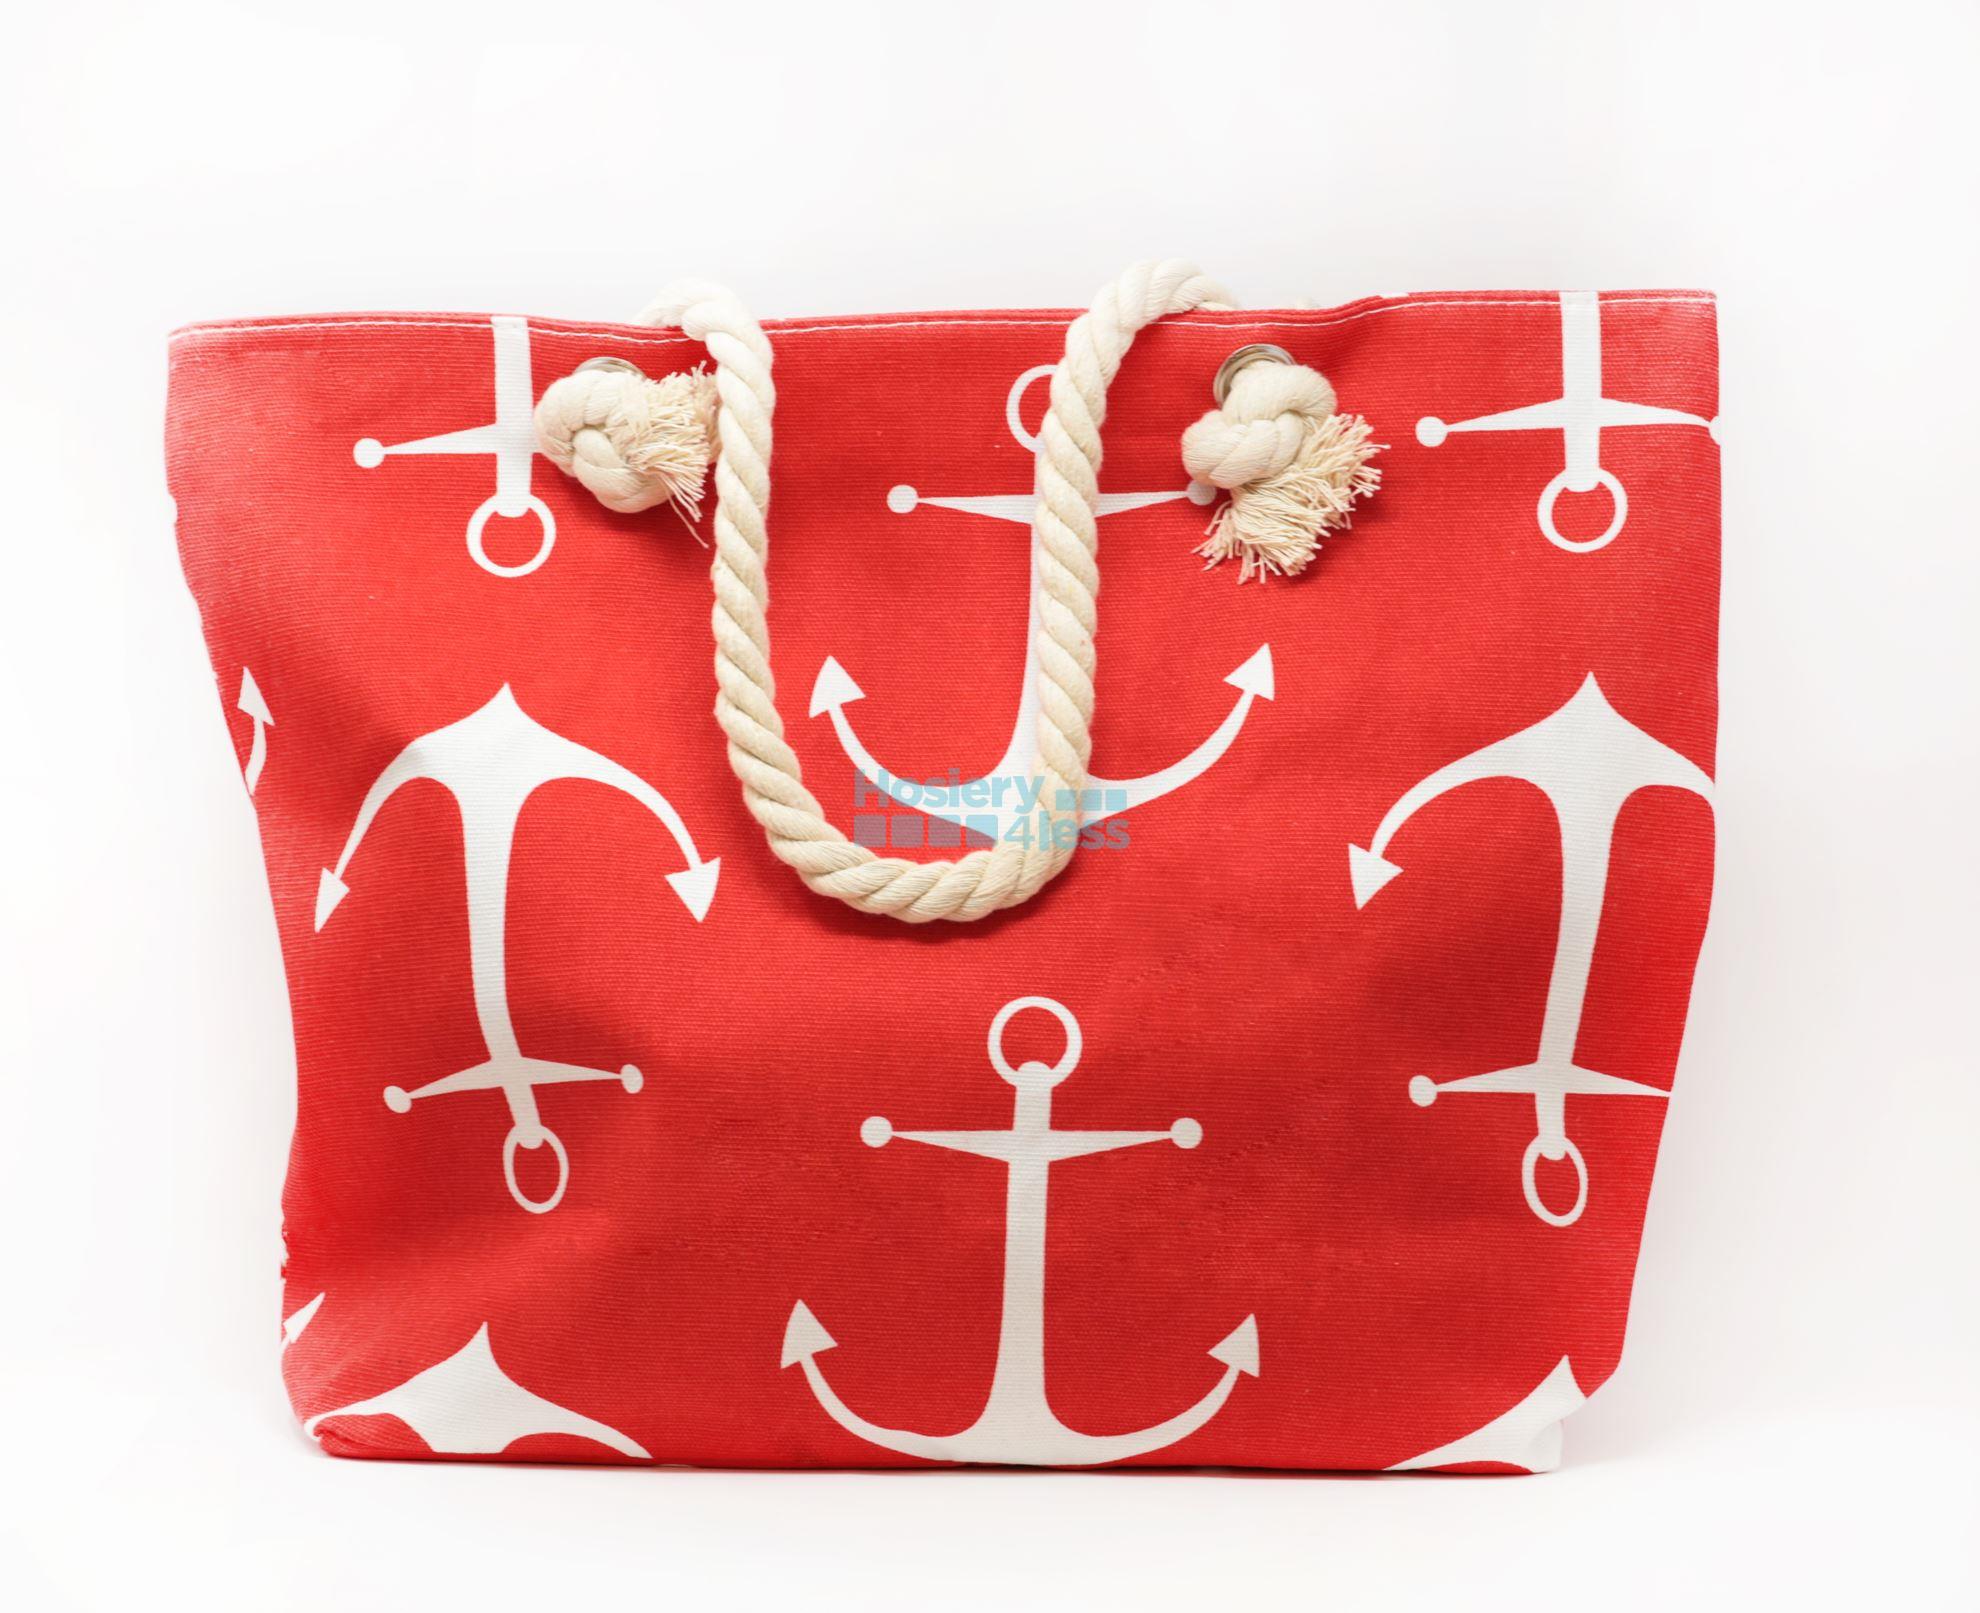 ANCHOR TOTE BAG. Hosiery4Less